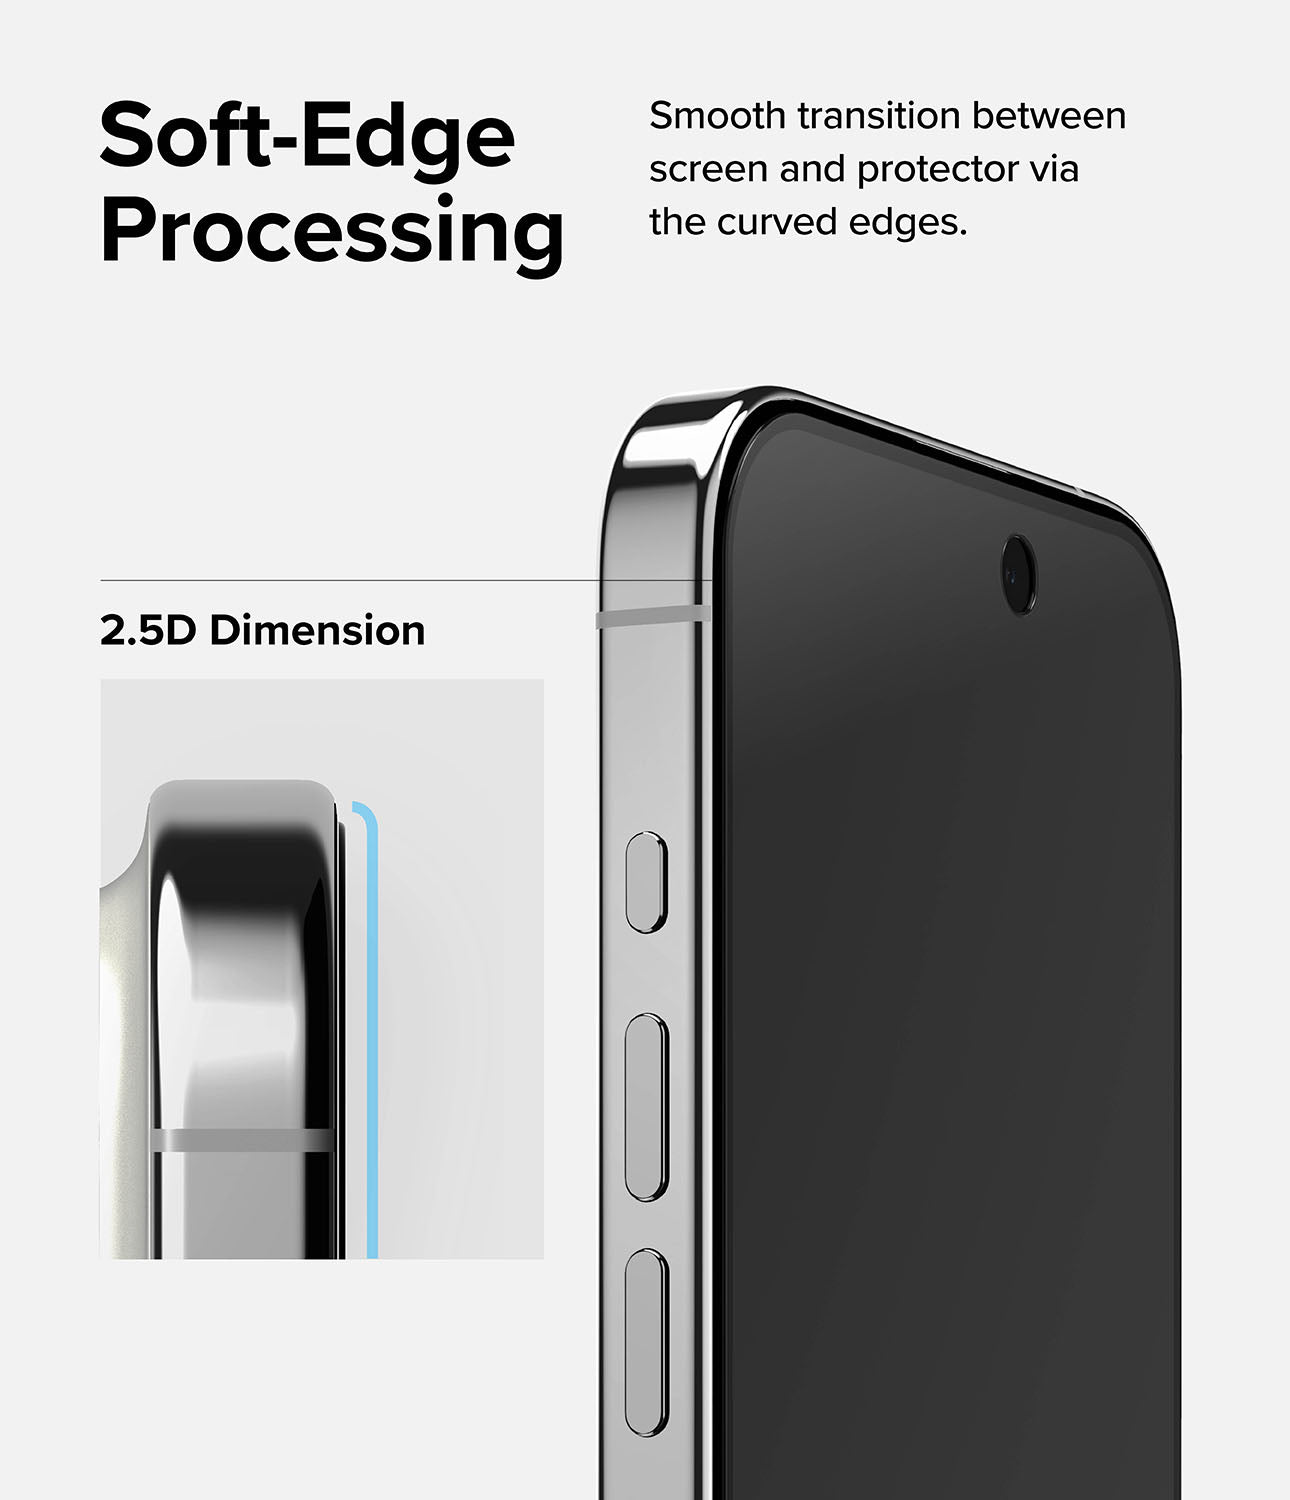 iPhone 15 Pro Screen Protector | Privacy Glass